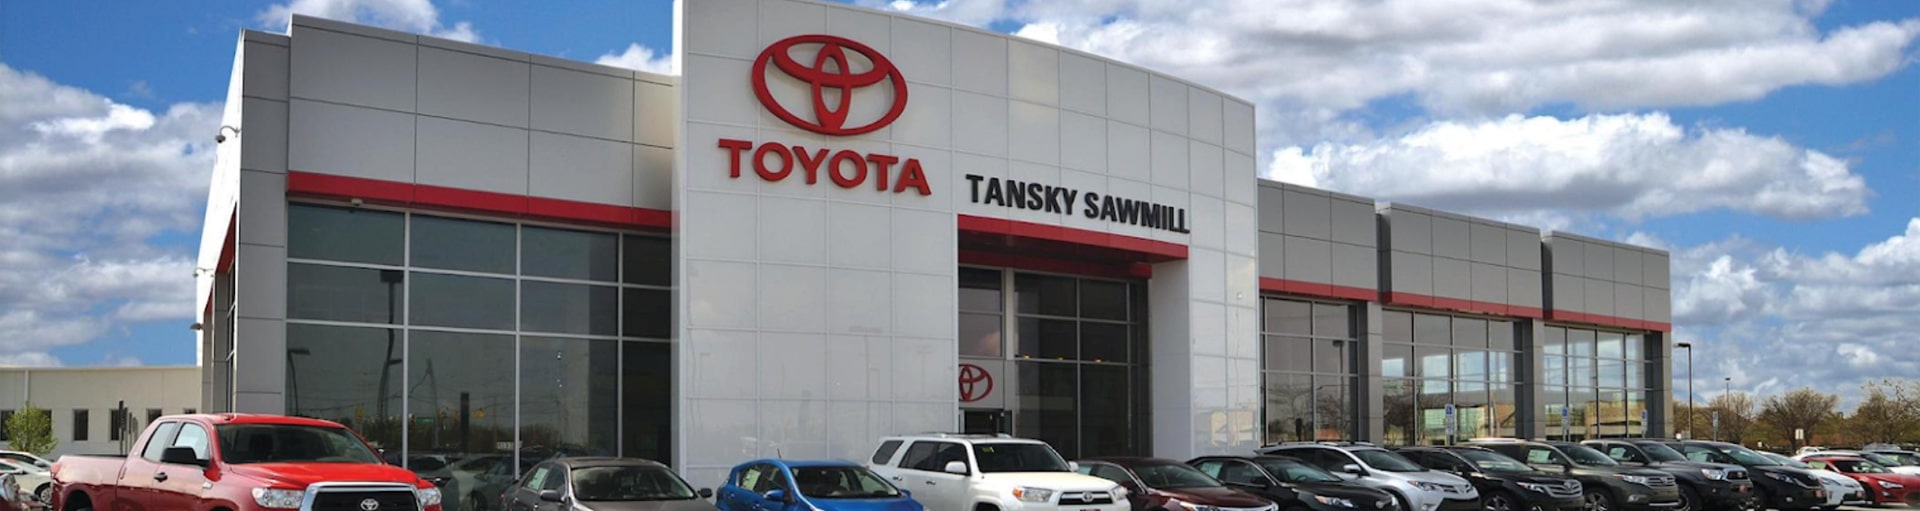 Tansky Sawmill Toyota Collision Paint Service